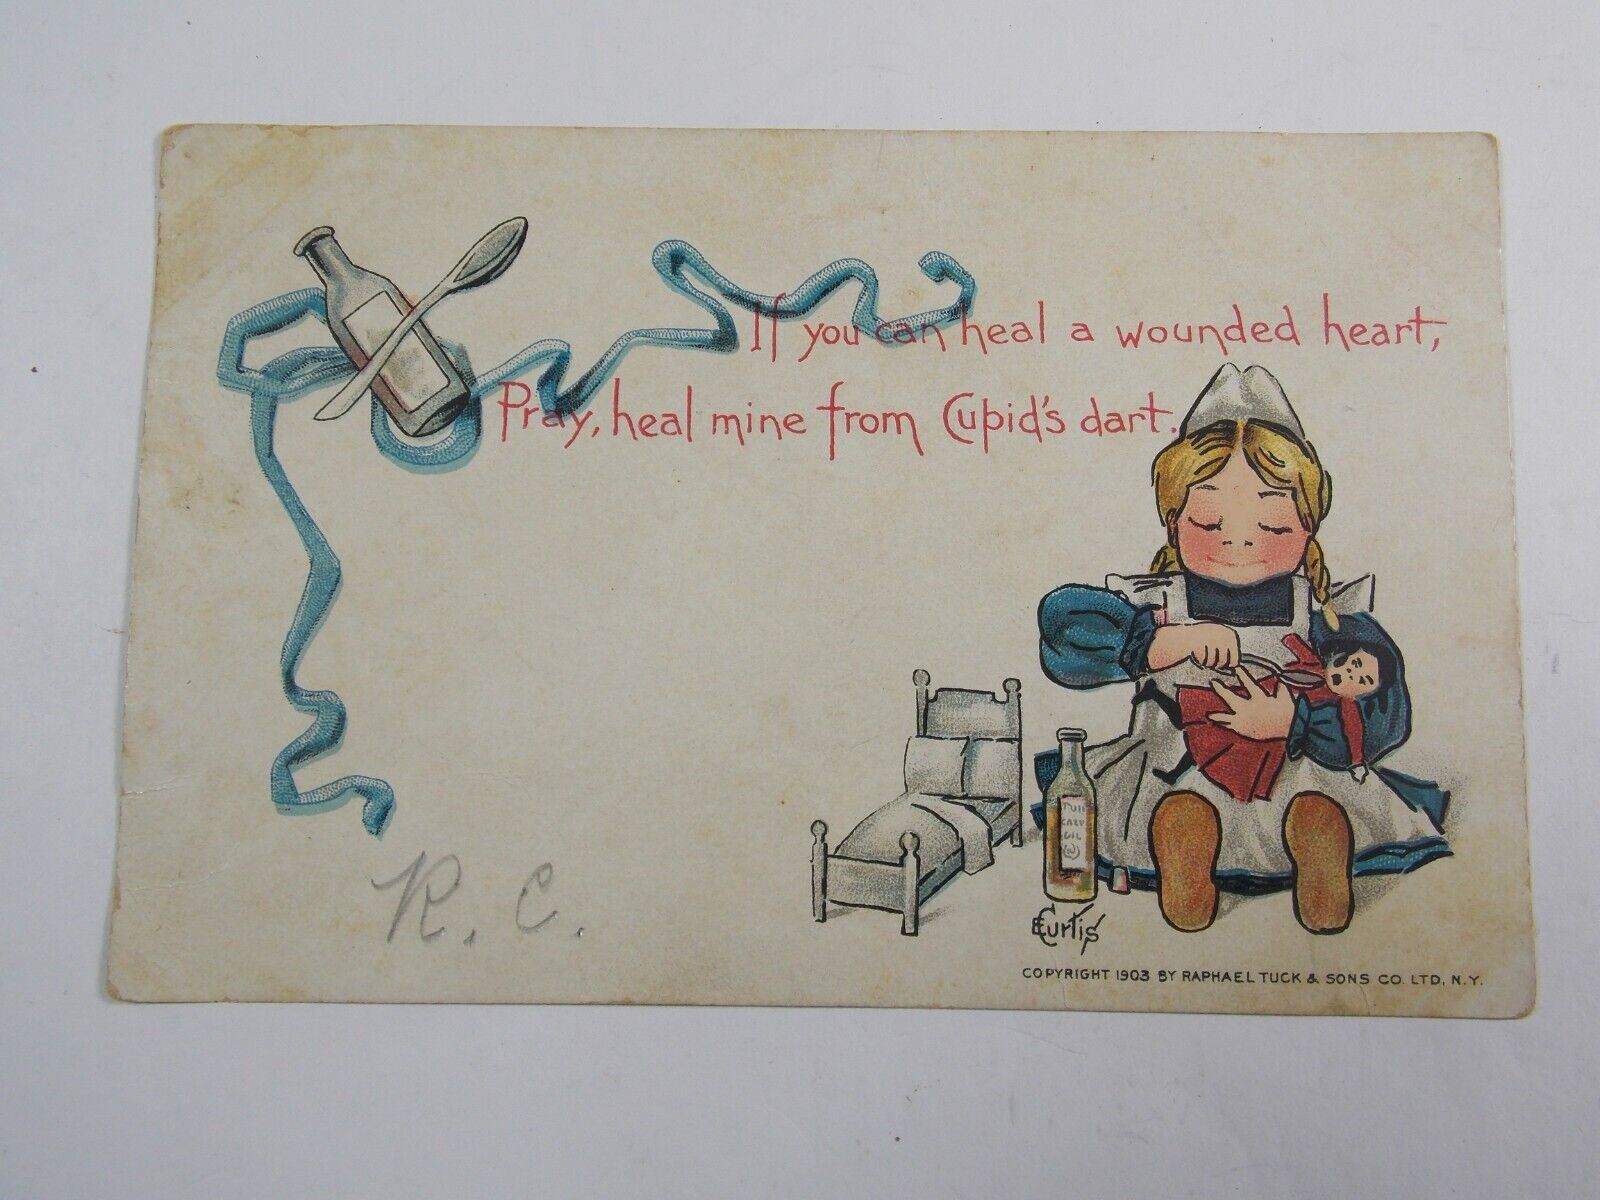 Vintage Postcard 1903 Girl Nurse If You Can Heal a Wounded Heart Prey Heal Mine